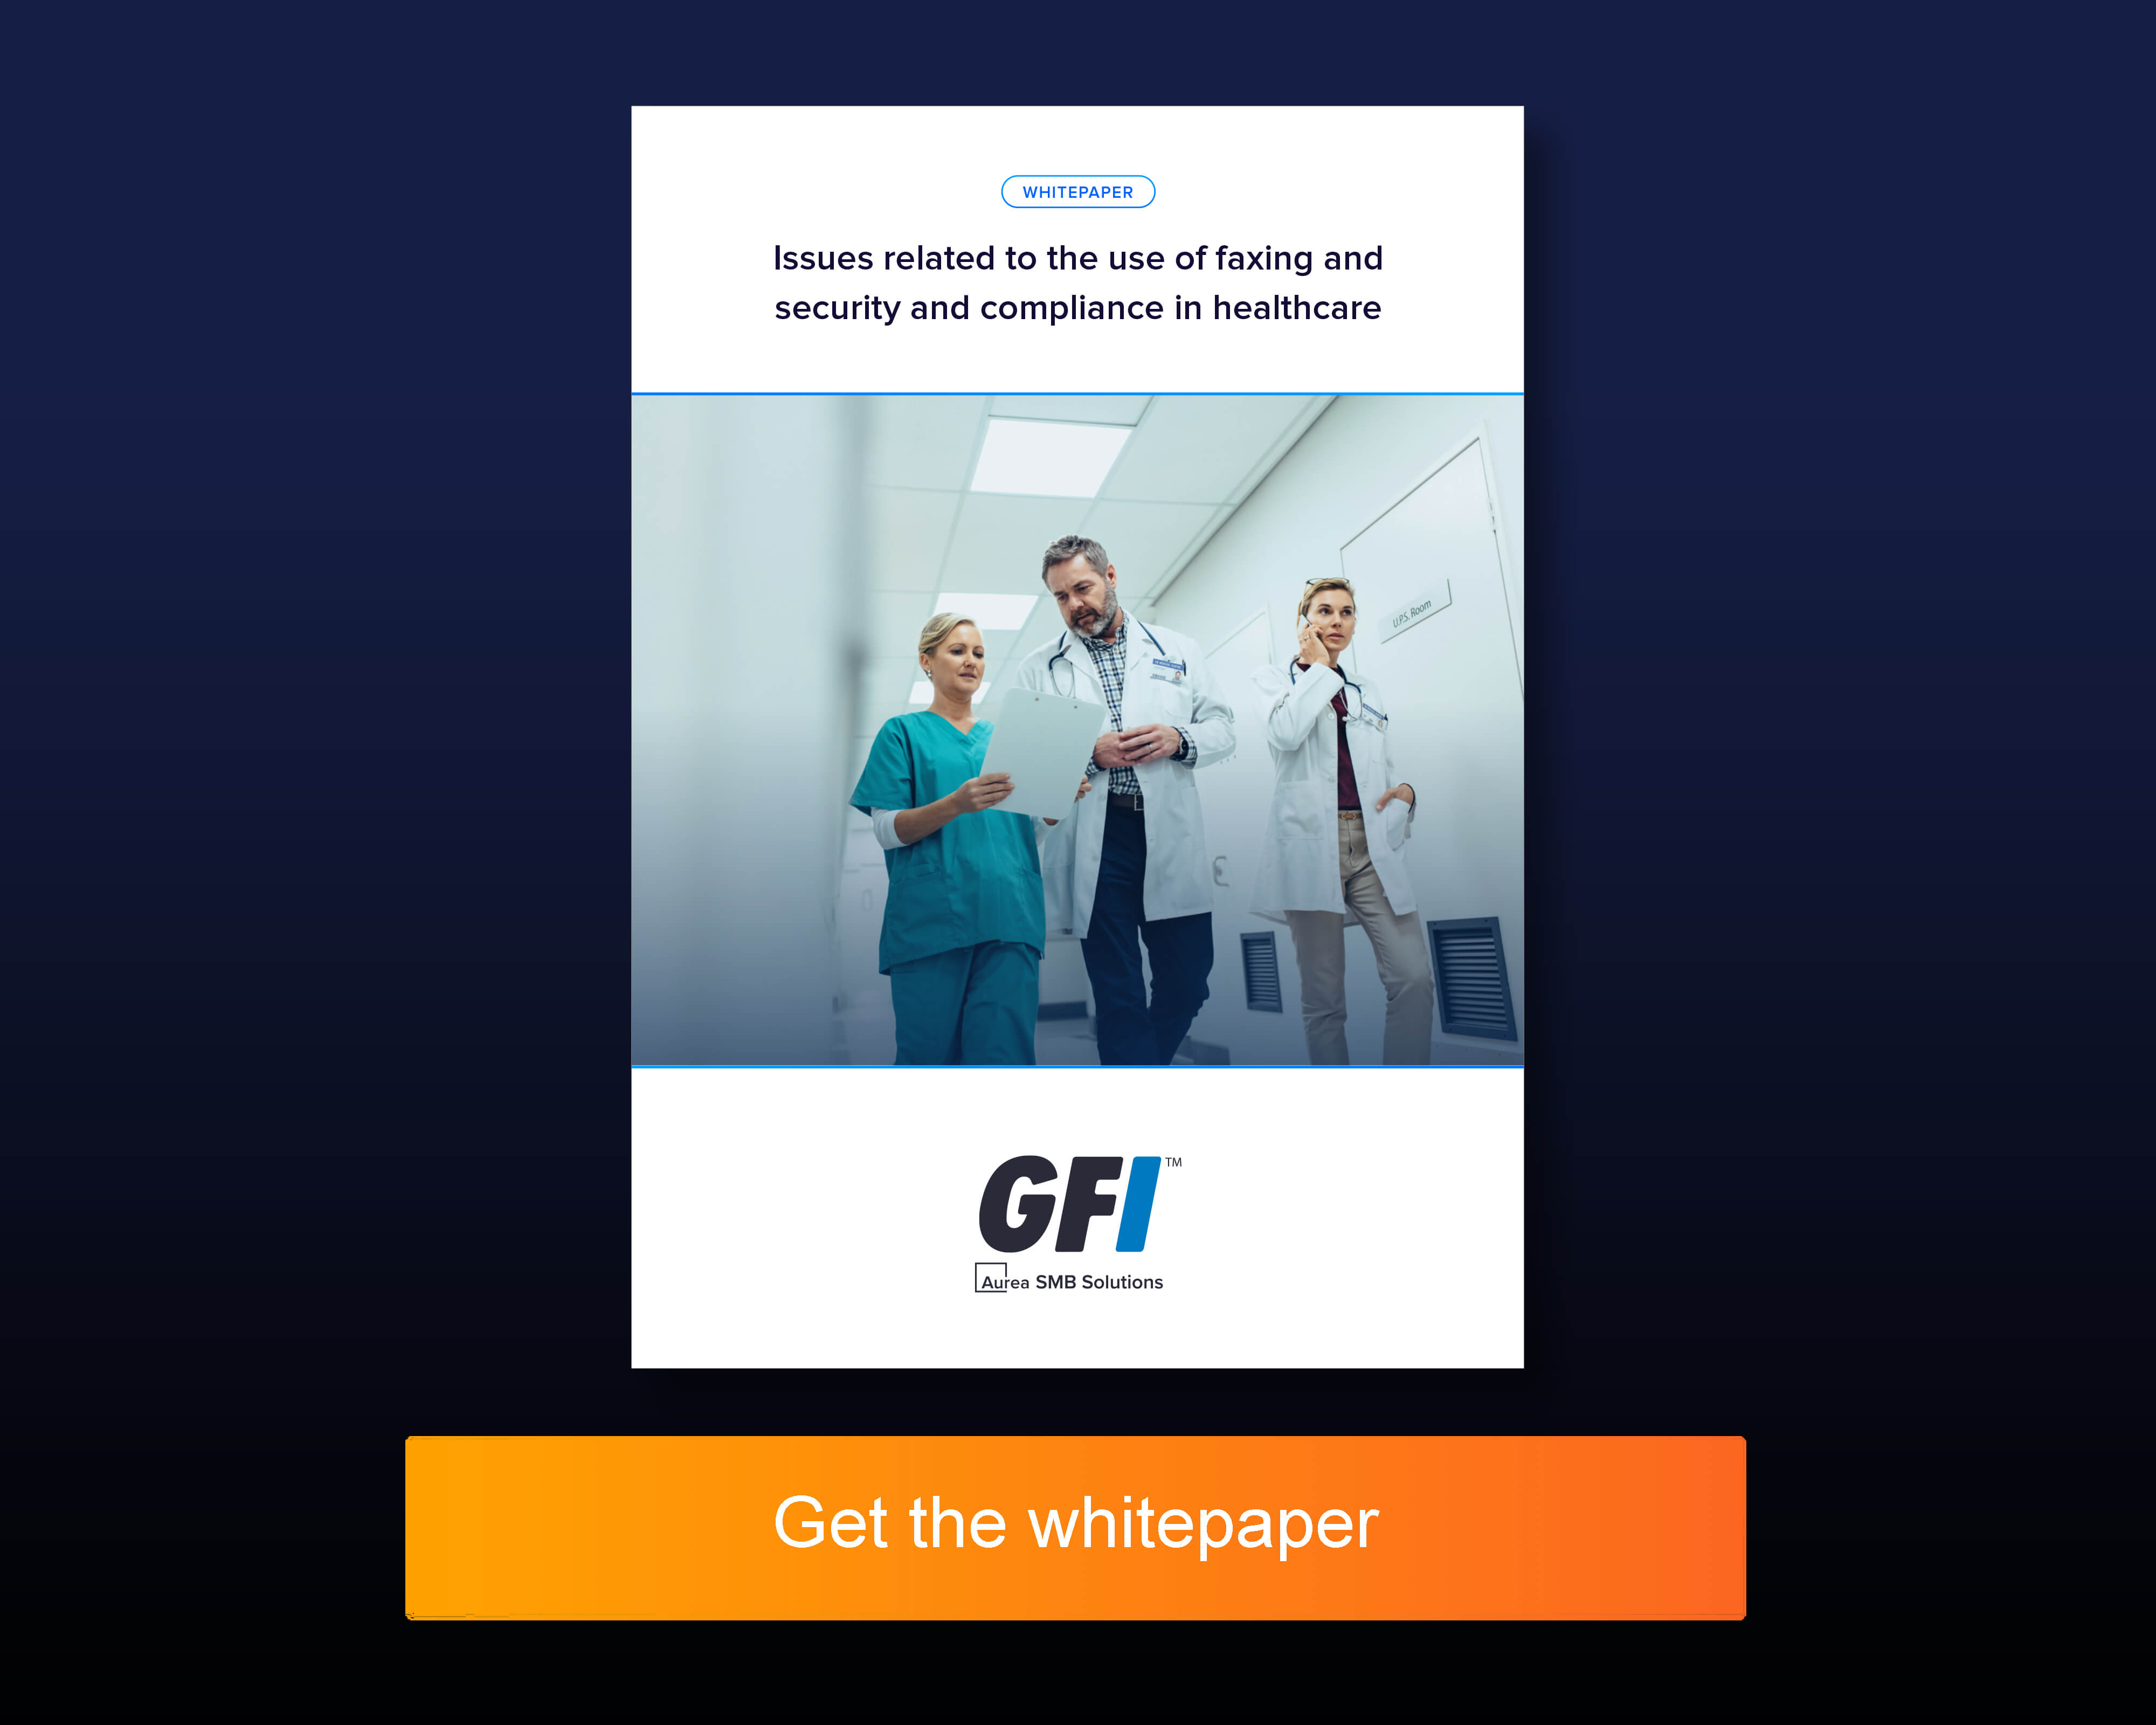 gfi-whitepaper_issues-related-to-the-use-of-faxing_advert-banner